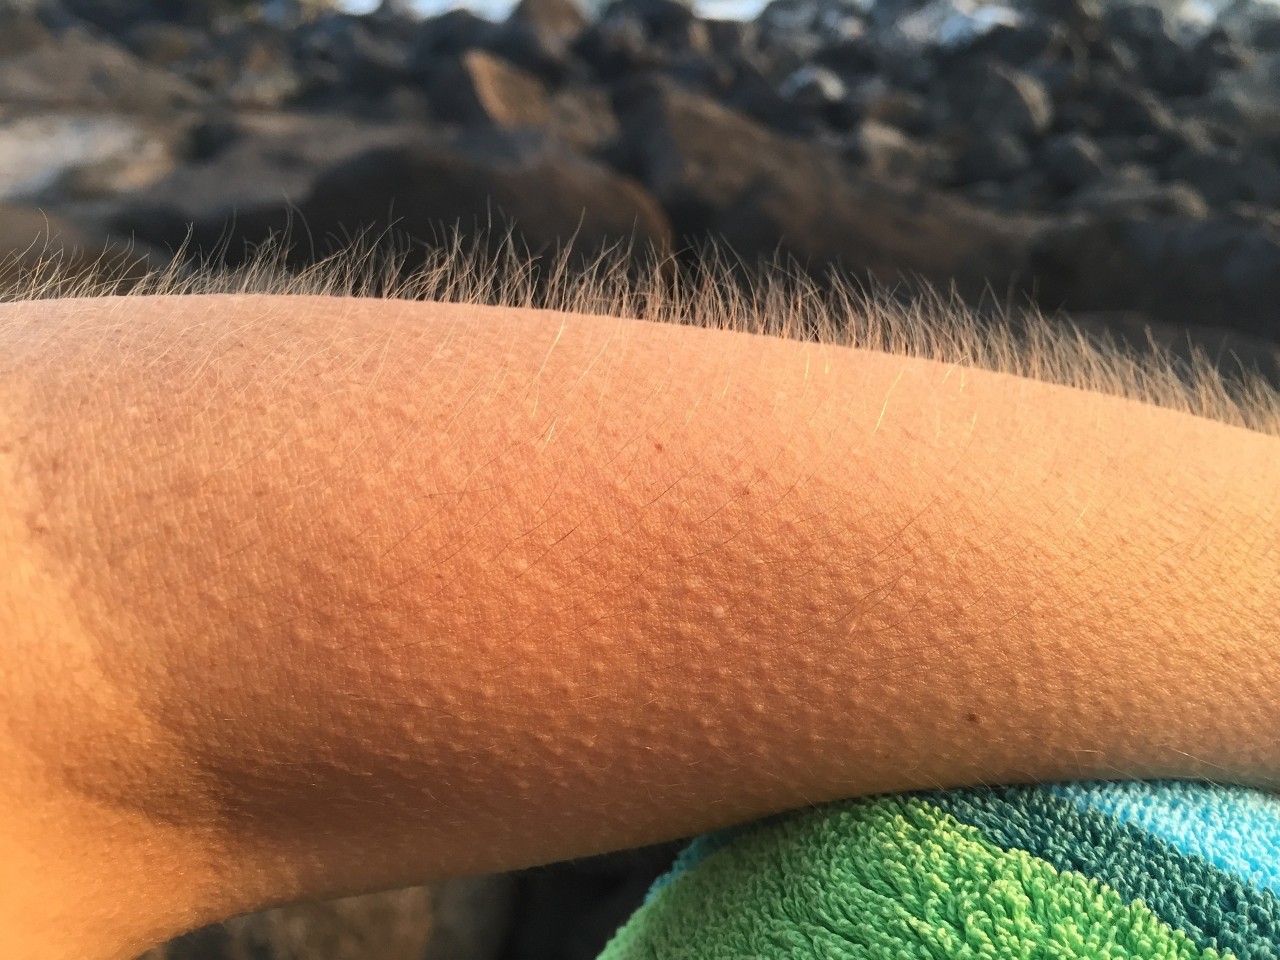 a photo of someone's arm with goosebumps